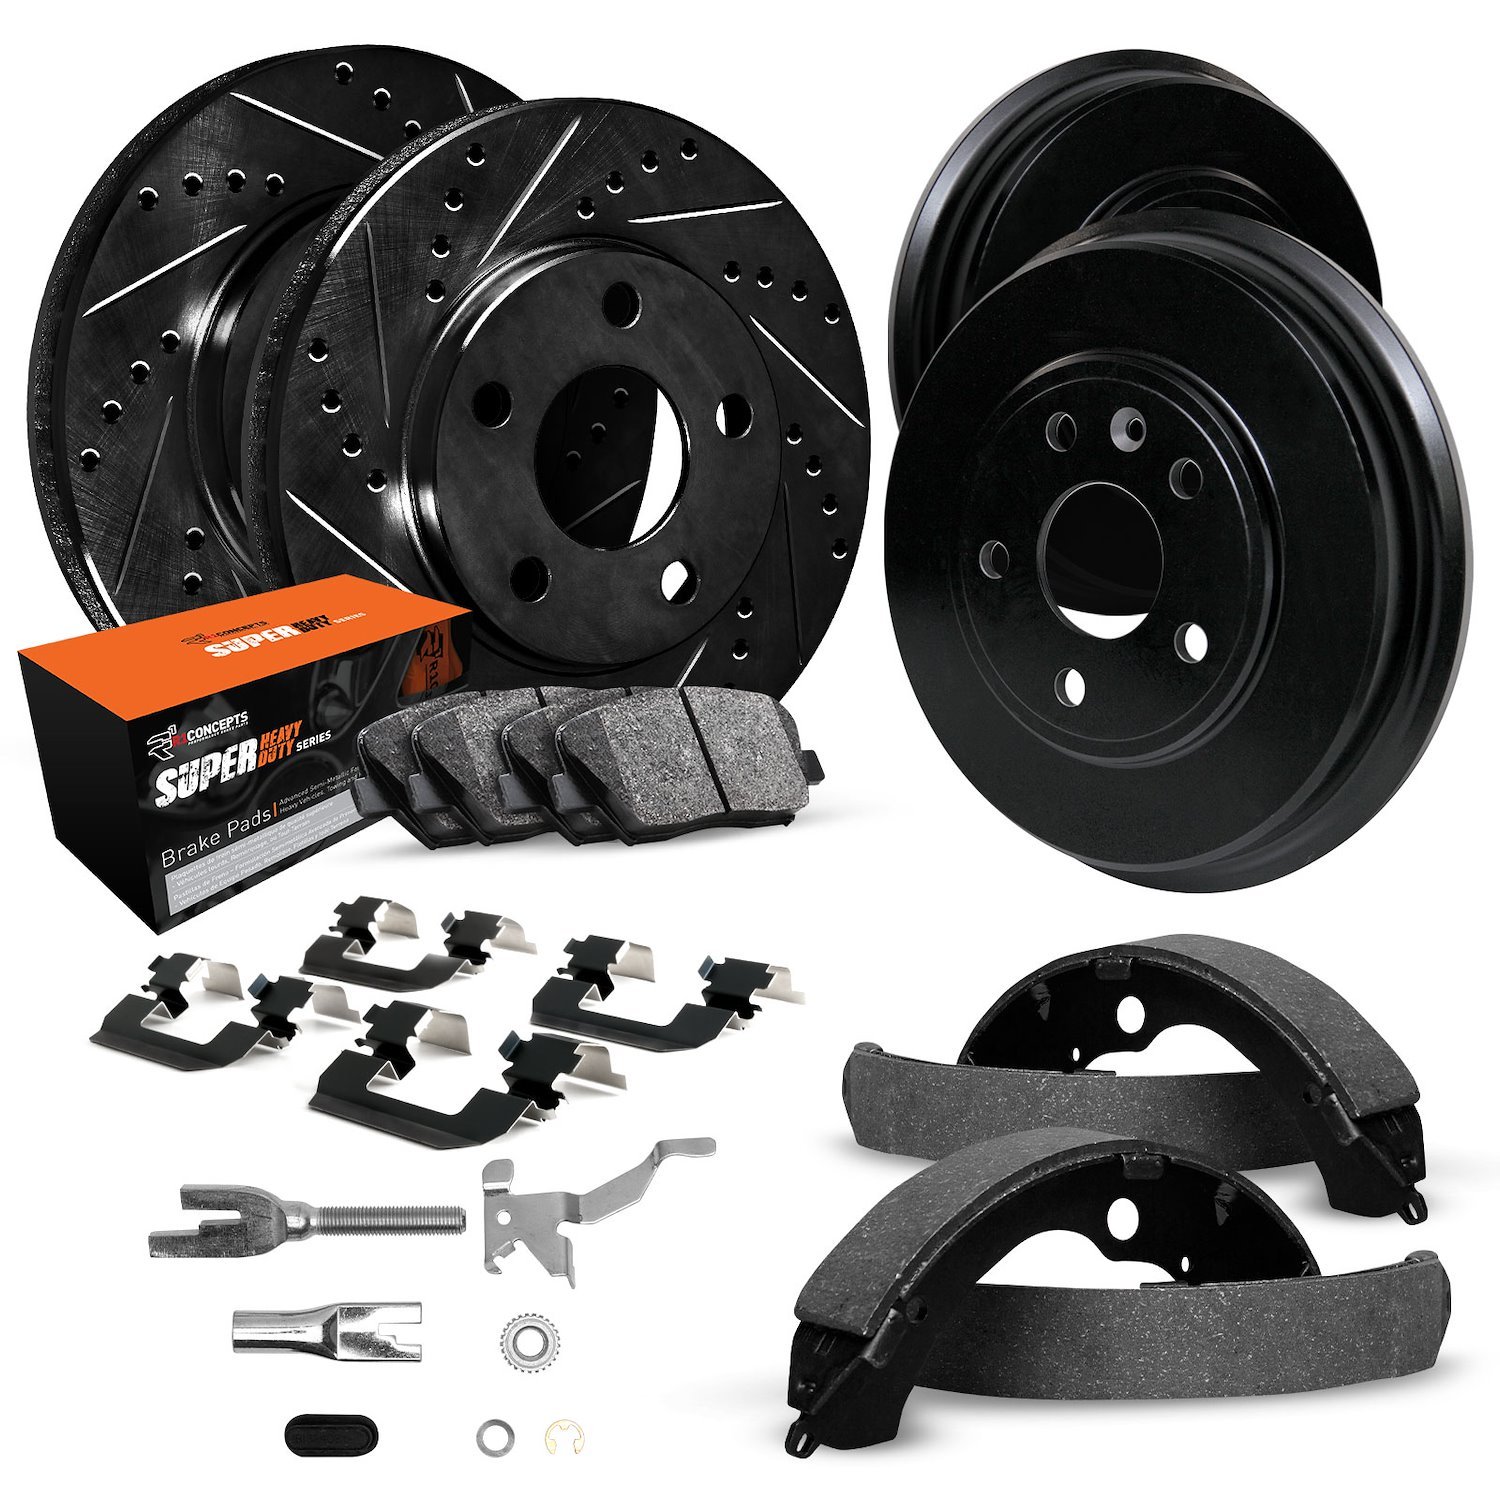 E-Line Drilled/Slotted Black Rotor & Drum Set w/Super-Duty Pads, Shoes, Hardware/Adjusters, 1988-1996 GM